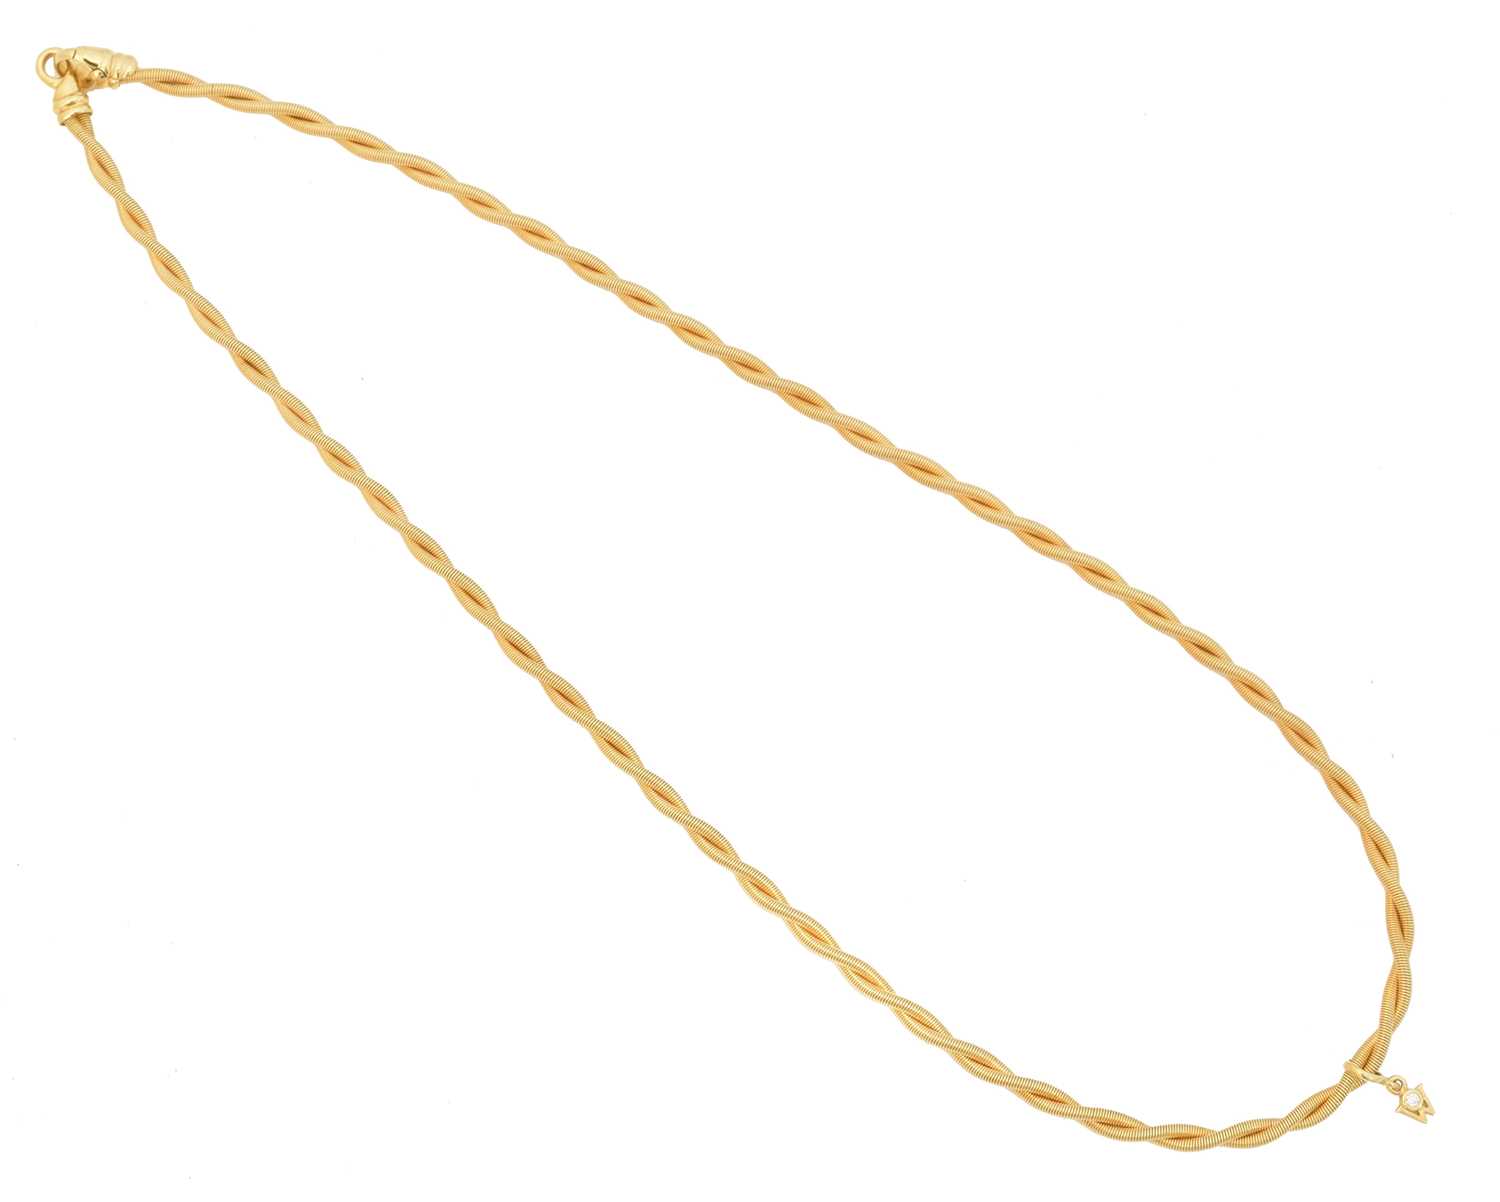 31 - An 18ct gold necklace by Wellendorff,